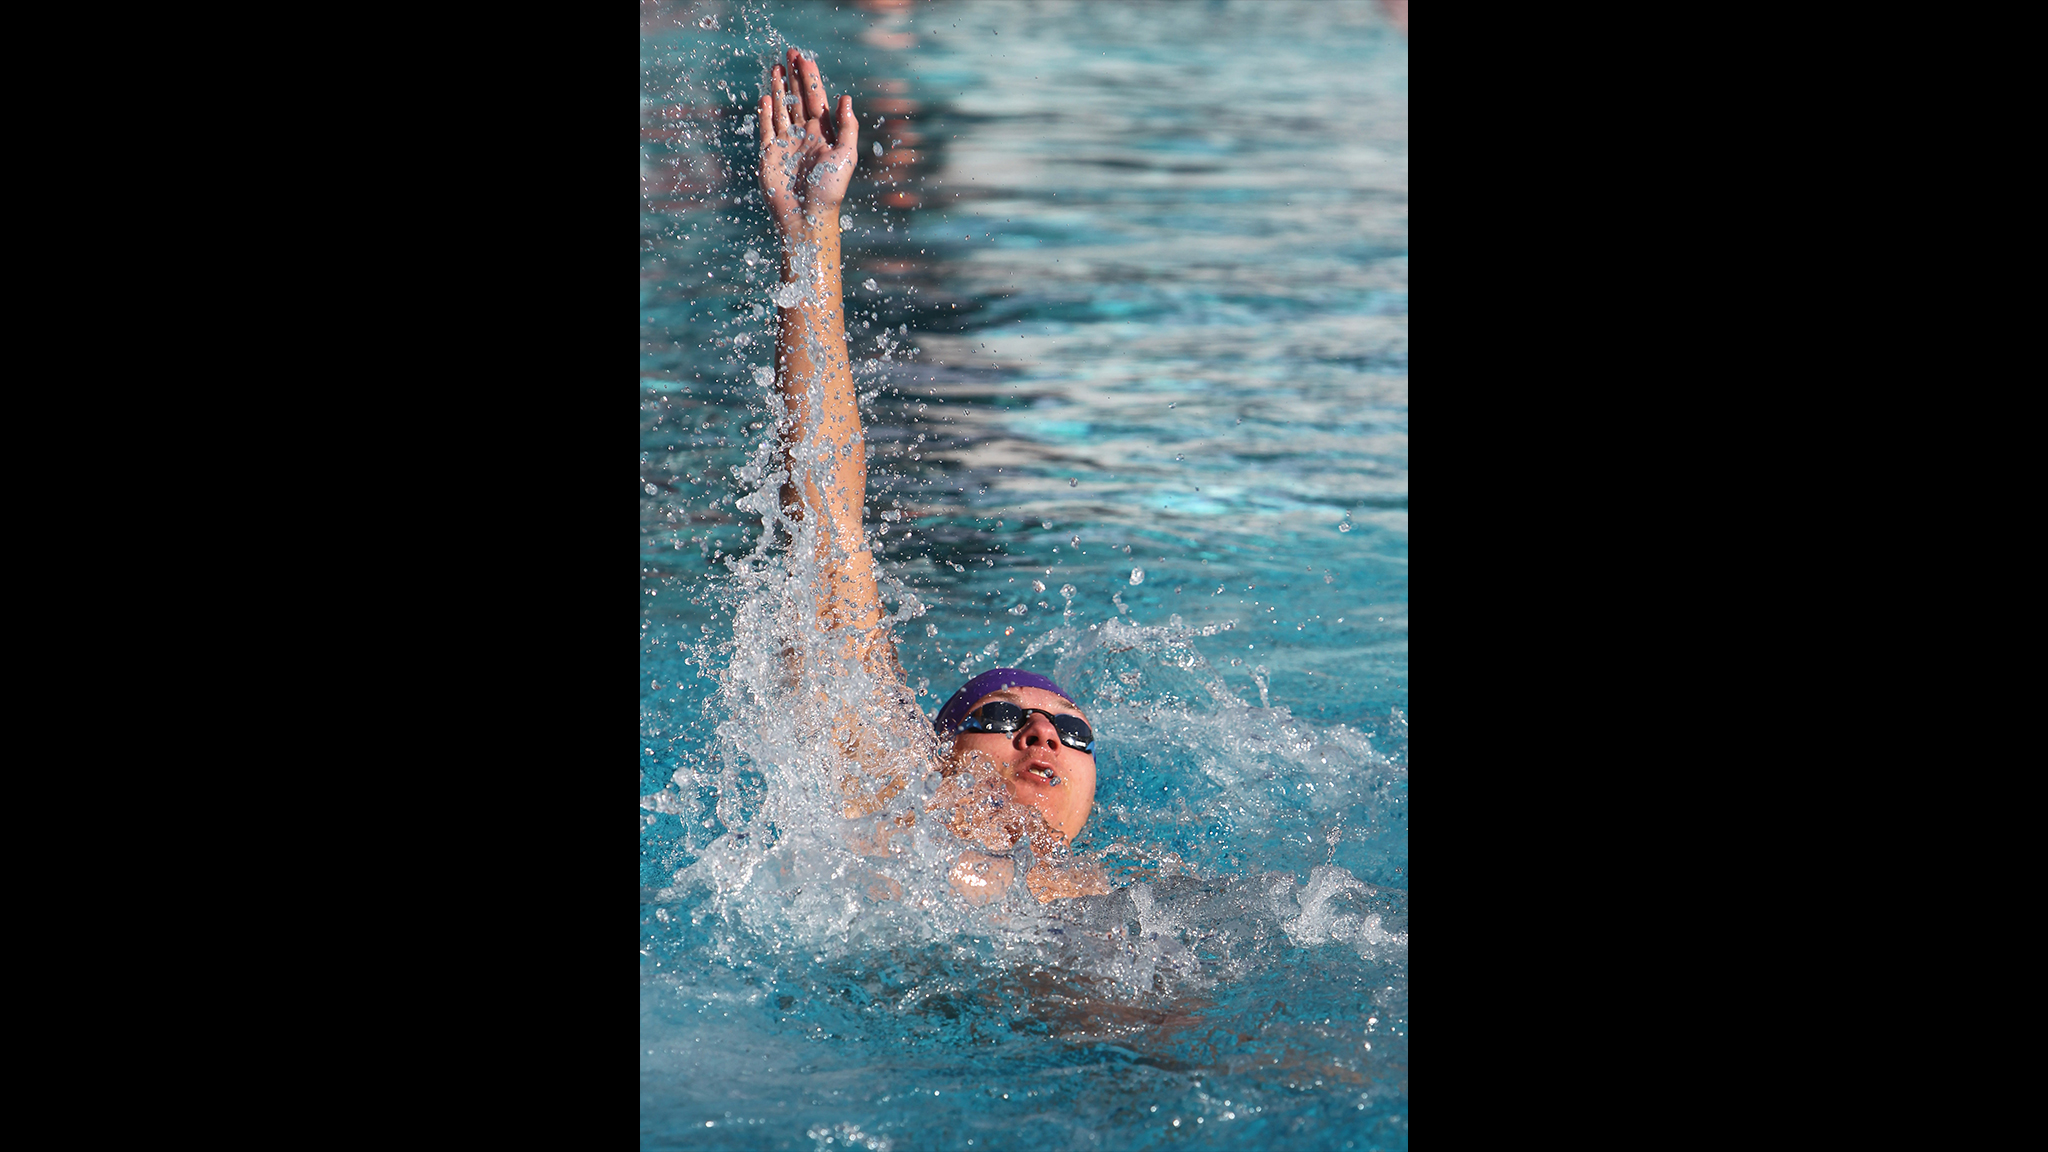 Palomar finds success at PCAC Invite #2